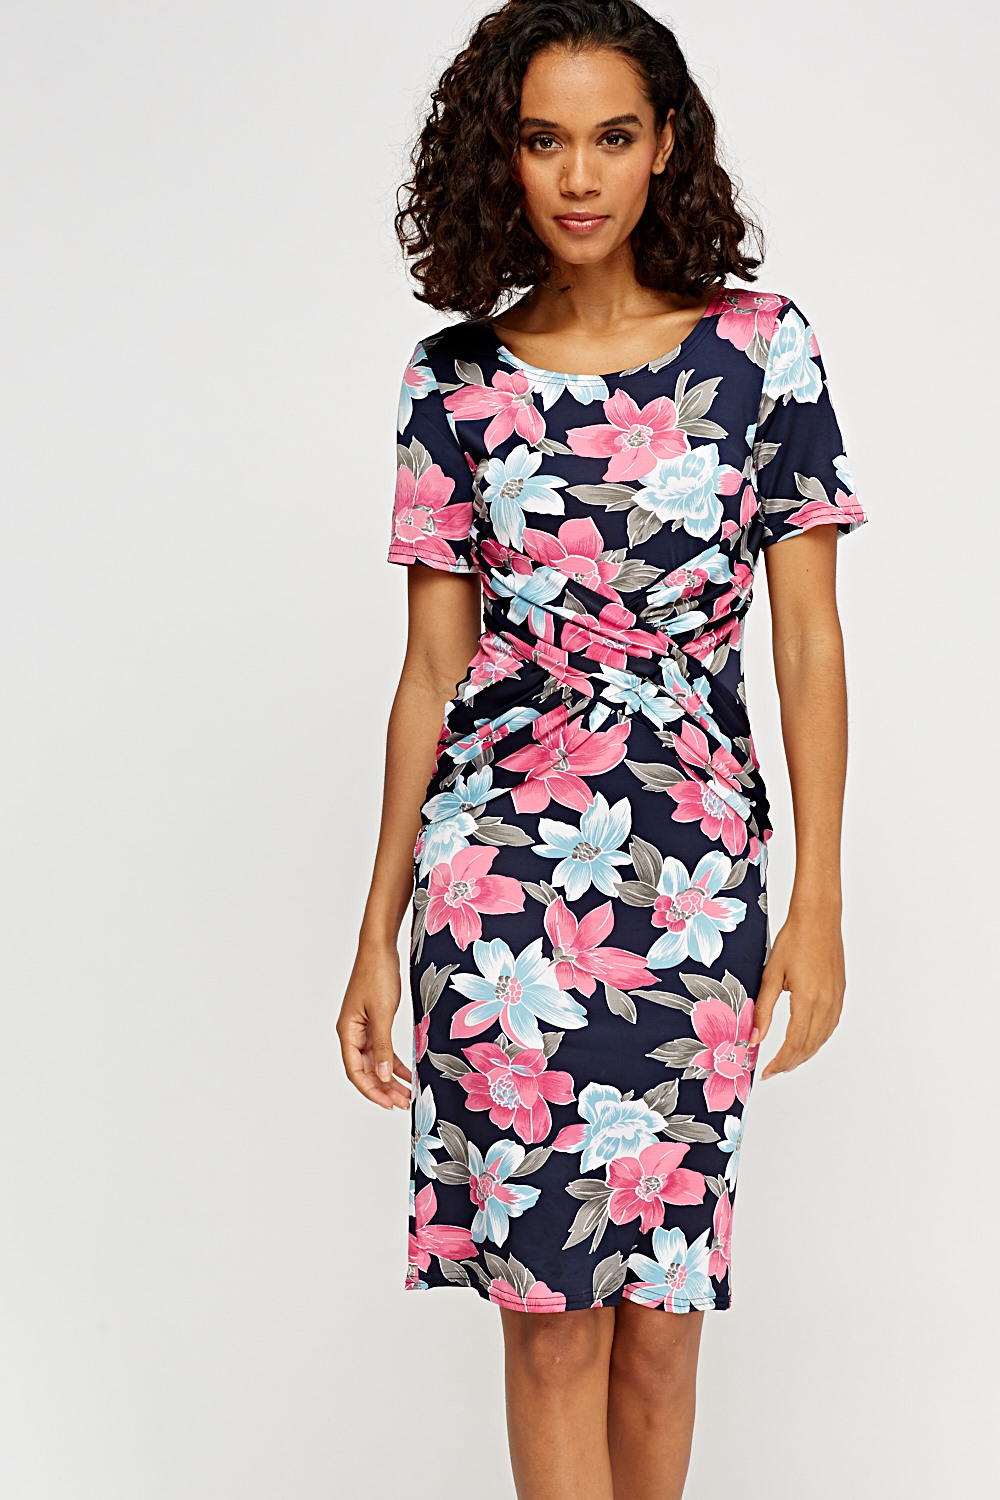 Ruched Floral Short Sleeve Dress - Just $6